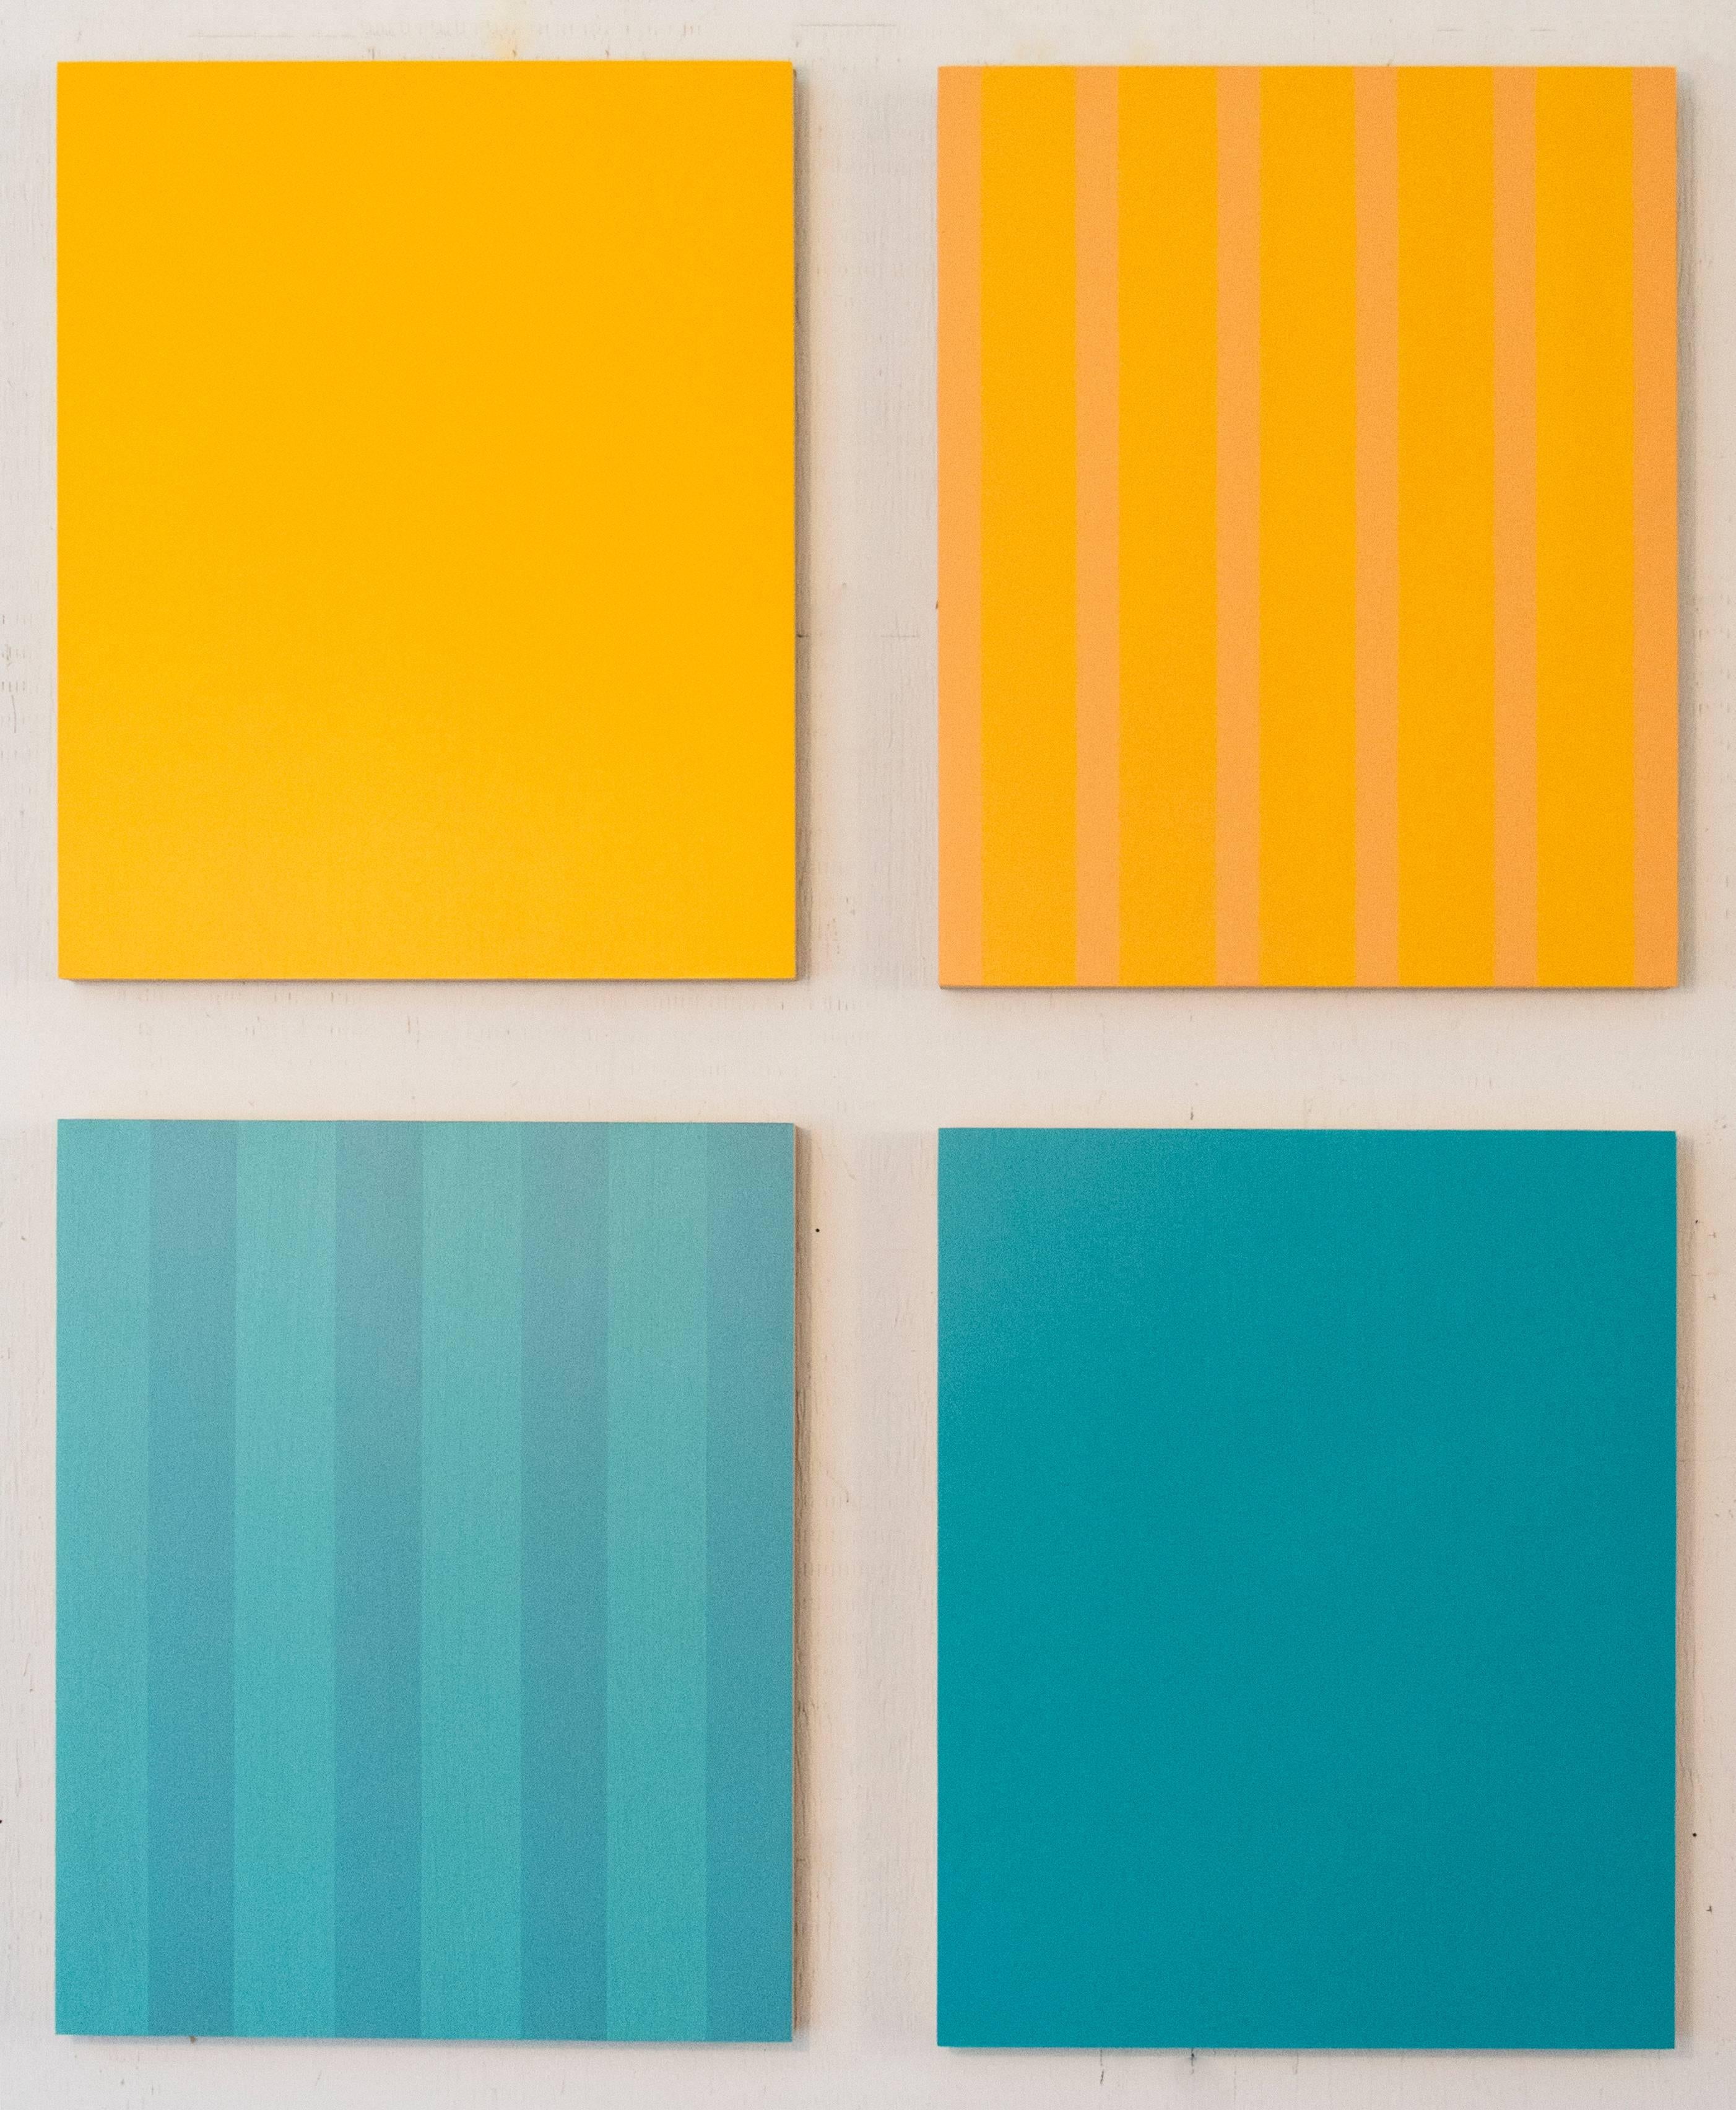 Twelve rectangular panels, each painted alternately in solid colors or solid with tinted vertical stripes, are installed in a precise grid: two high and six across. The artist began this work in 2003 painting two then and coming back to the panels